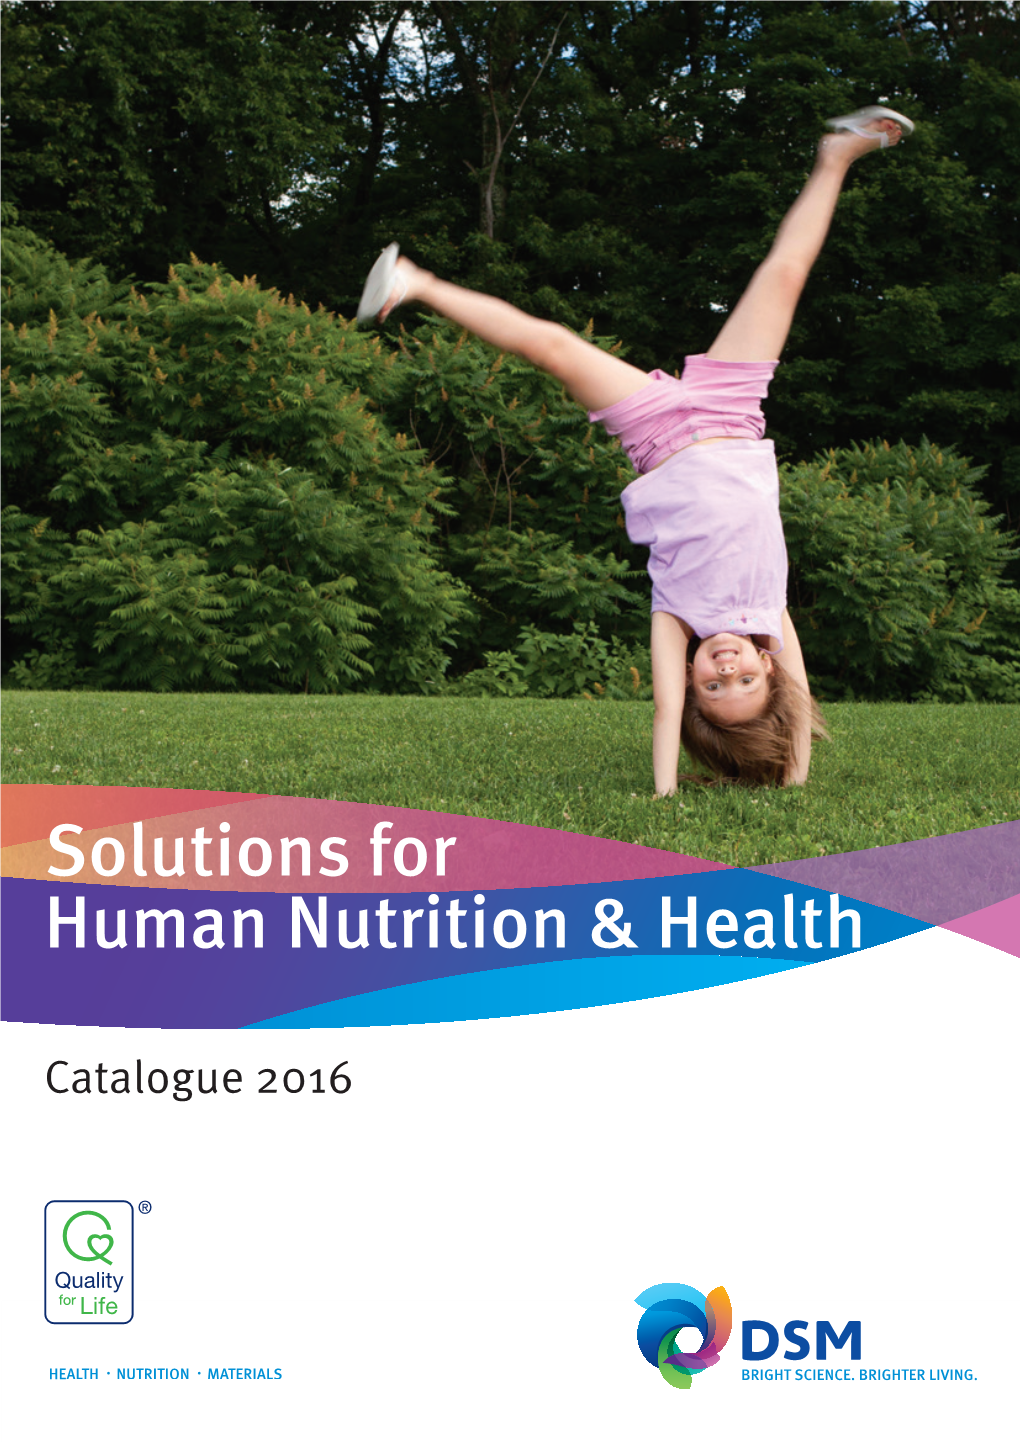 Solutions for Human Nutrition & Health